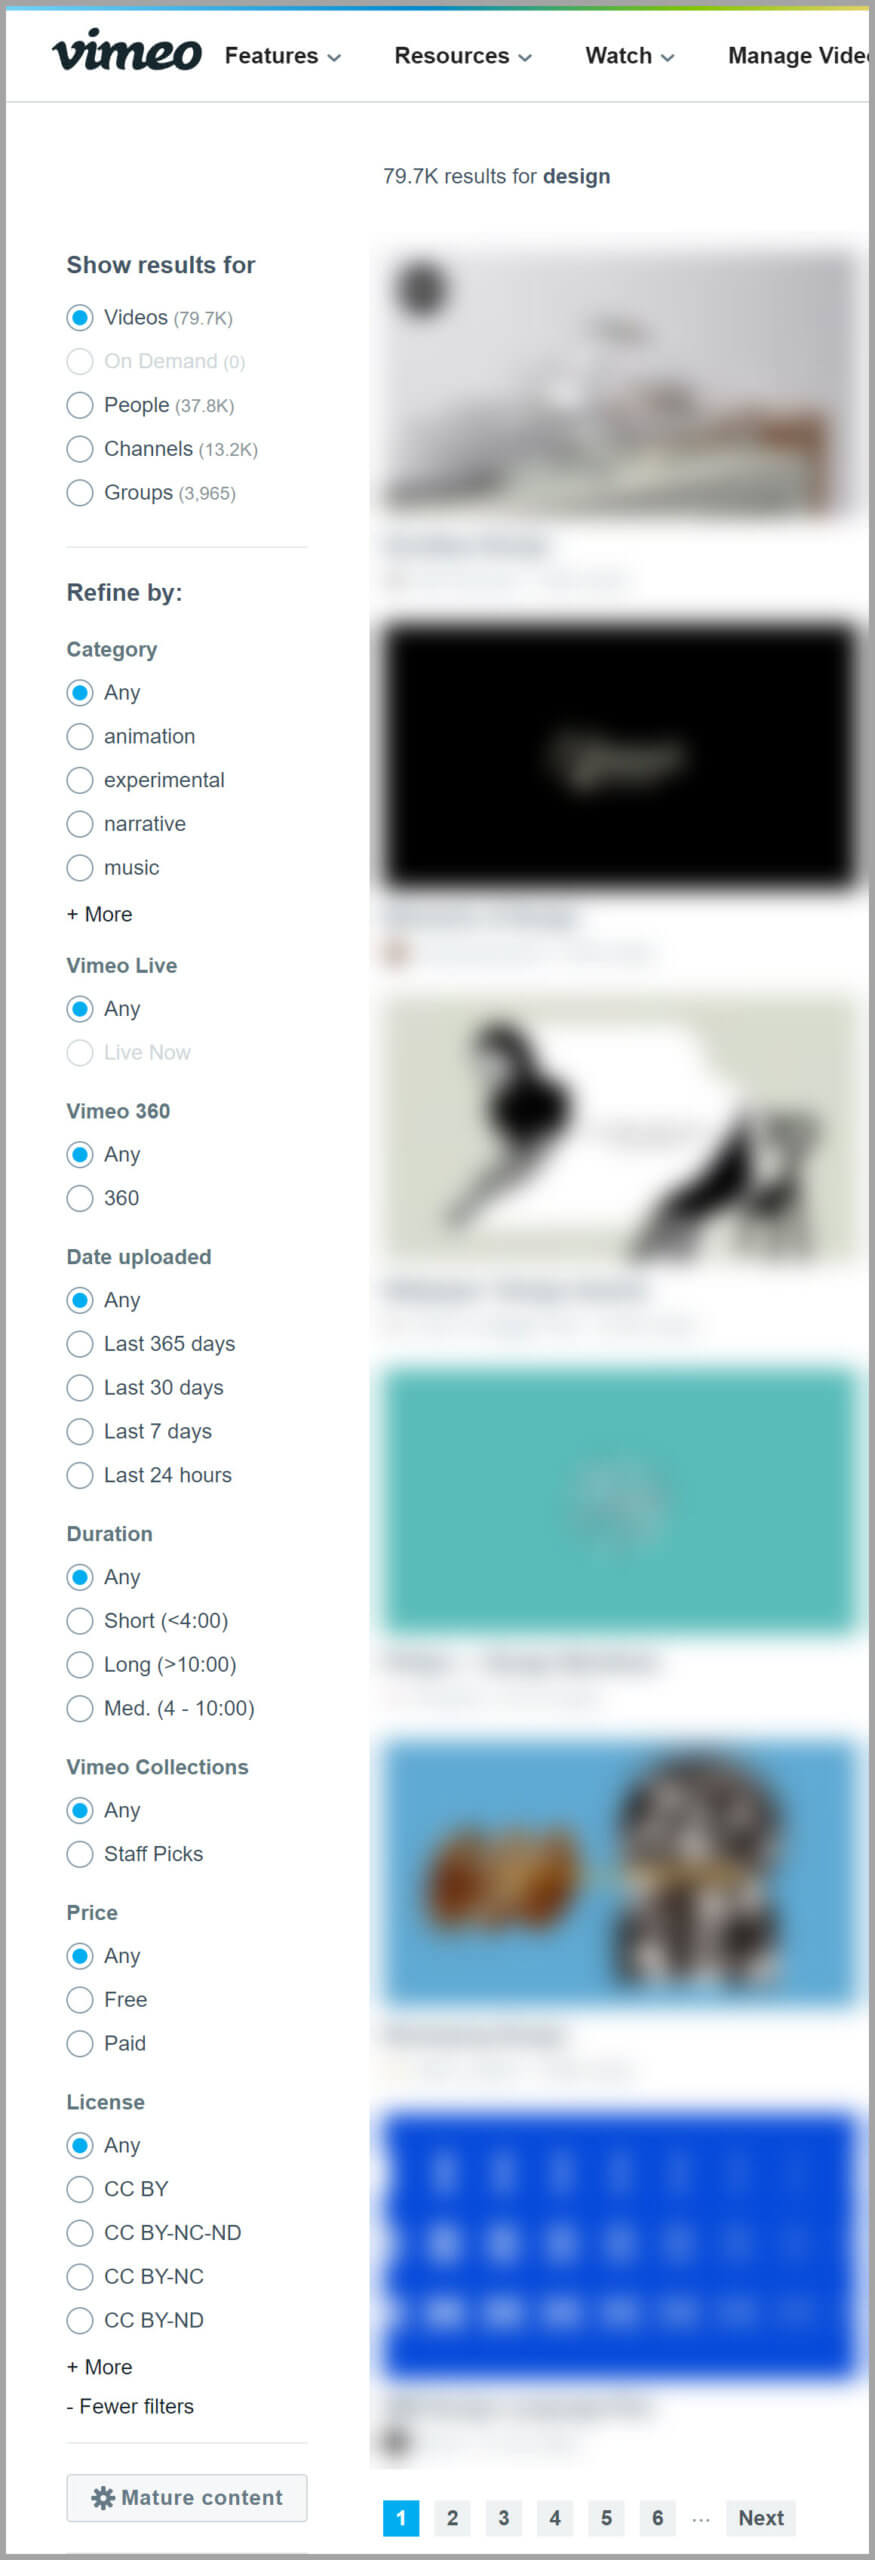 Filter License in Vimeo Video Search Results